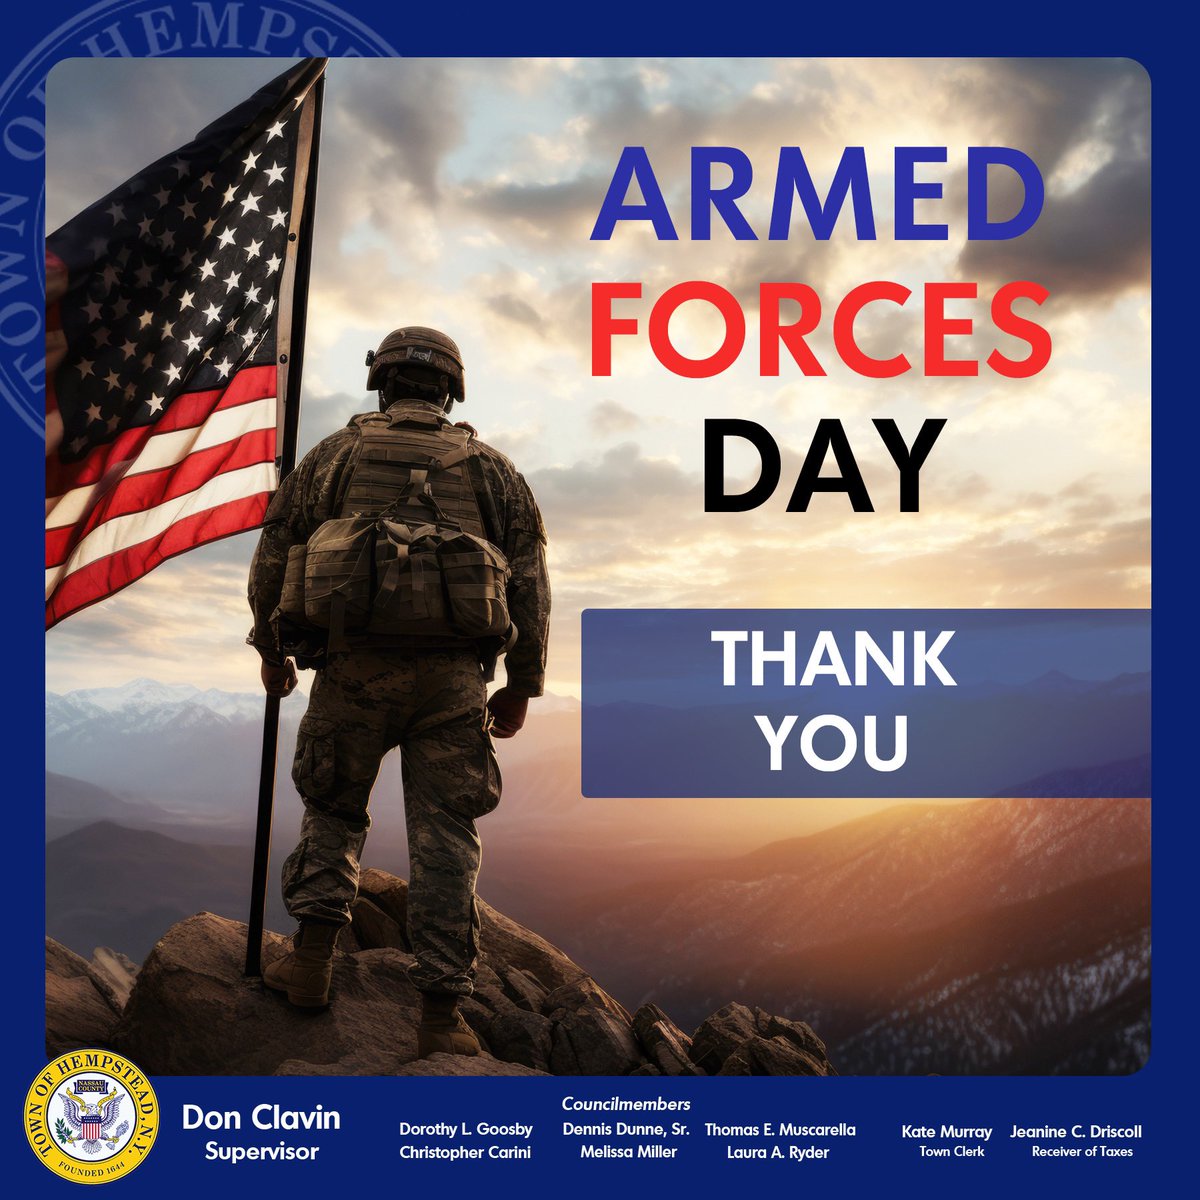 Today, May 18, is Armed Forces Day. This is a special day for us to honor the brave men and women who serve in our nation's military. To all our service members, I want to express my deepest gratitude. Thank you for everything you do to protect our country and its values.